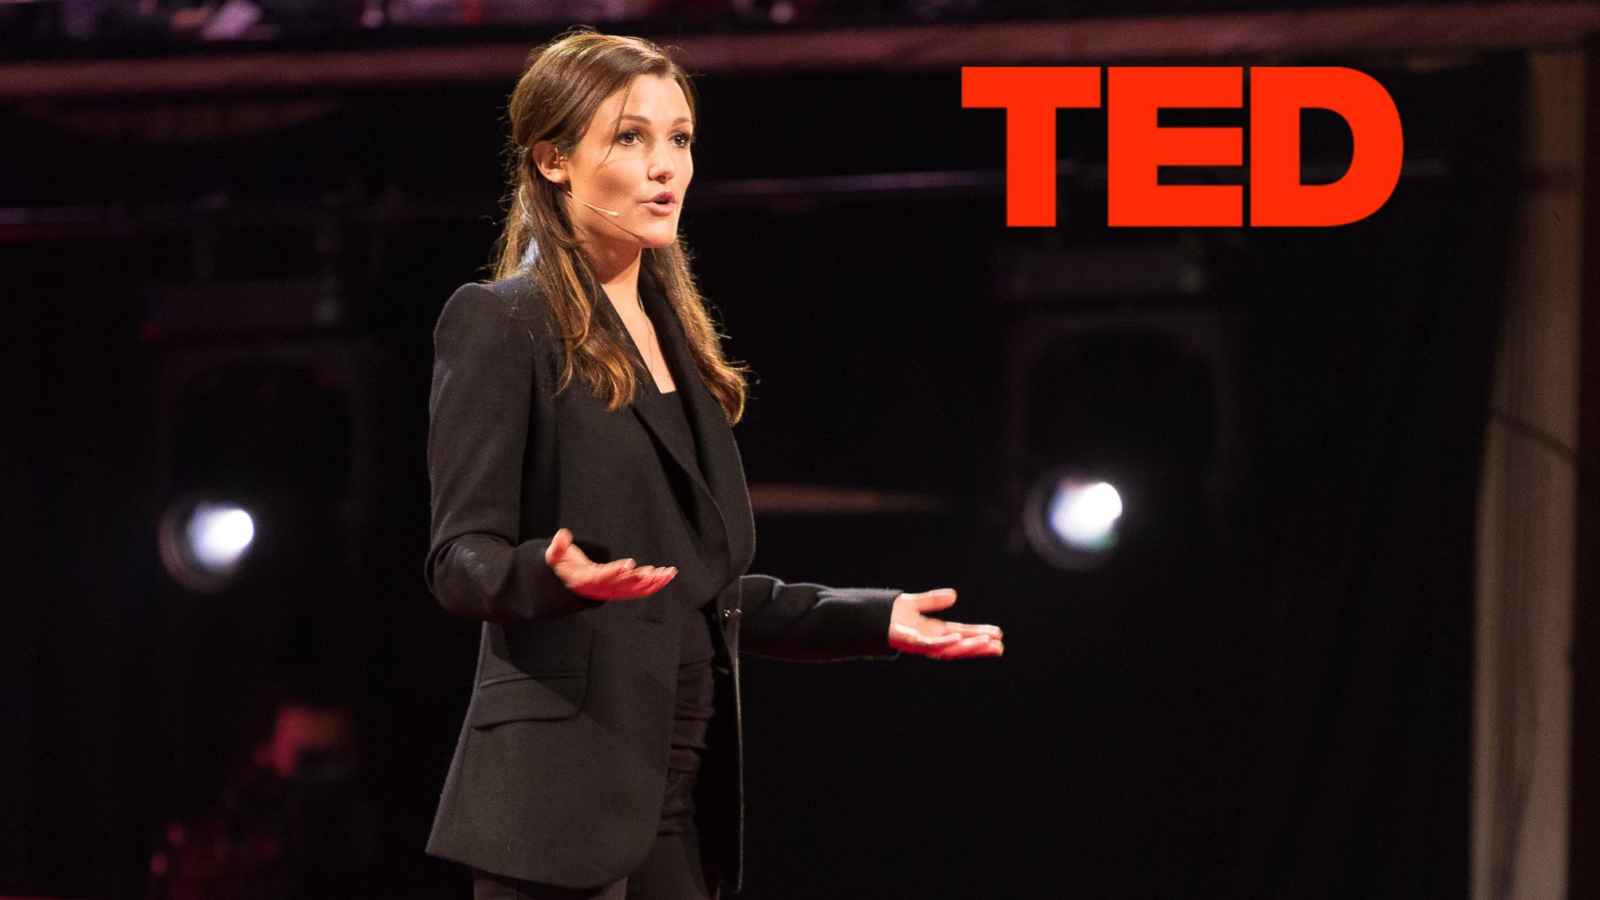 CCT co founder Tara Winkler giving her TED talk on why we need to end the era of orphanages